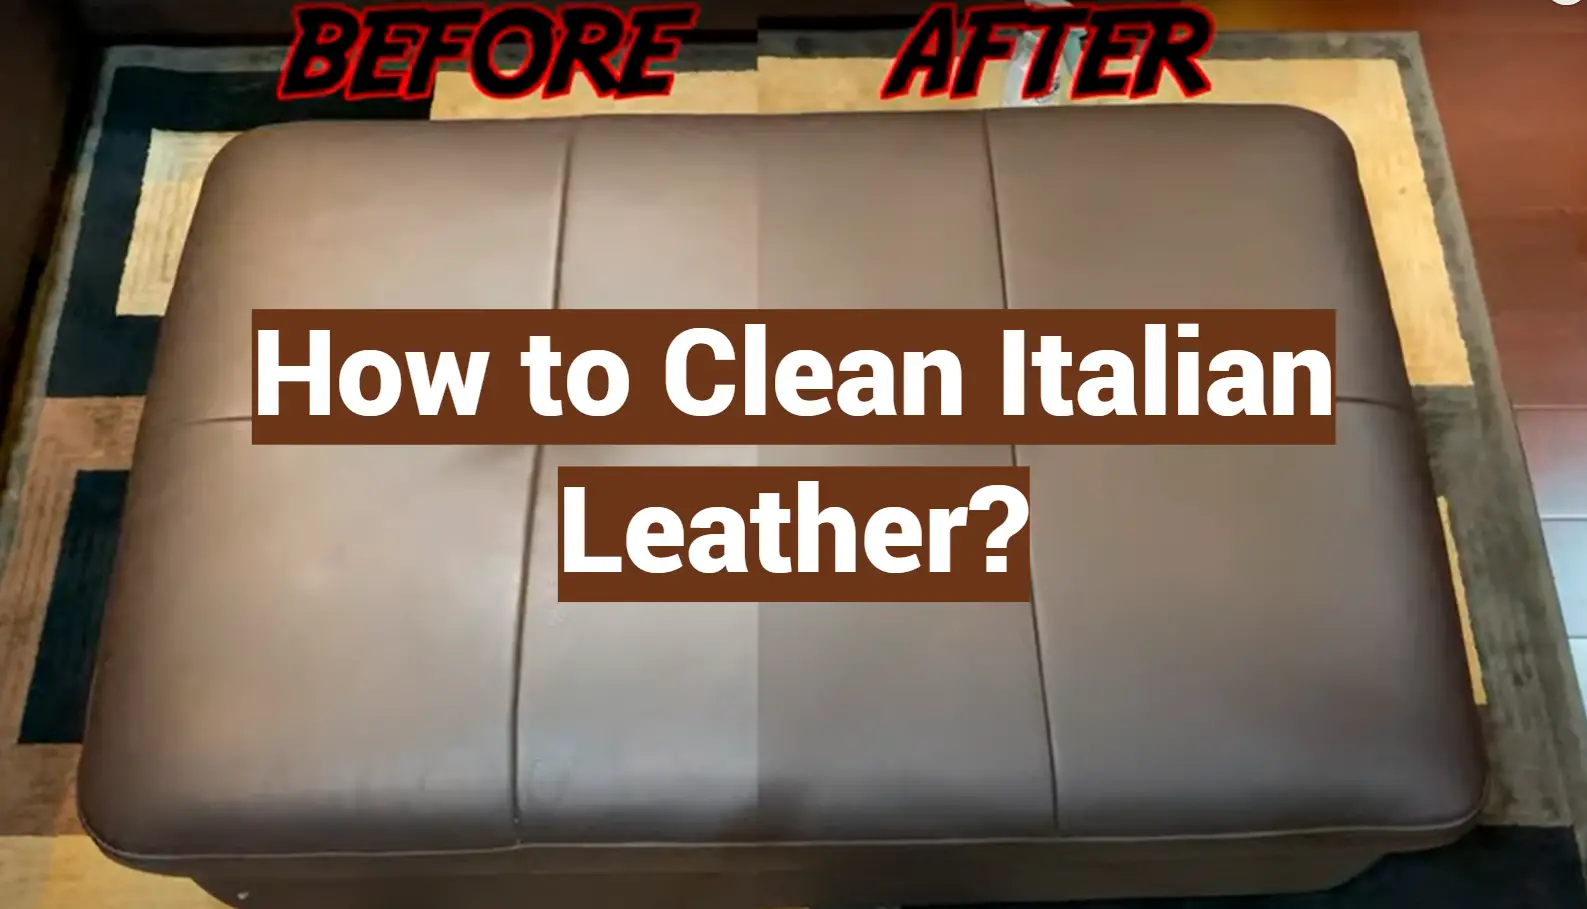 How to Clean Italian Leather?